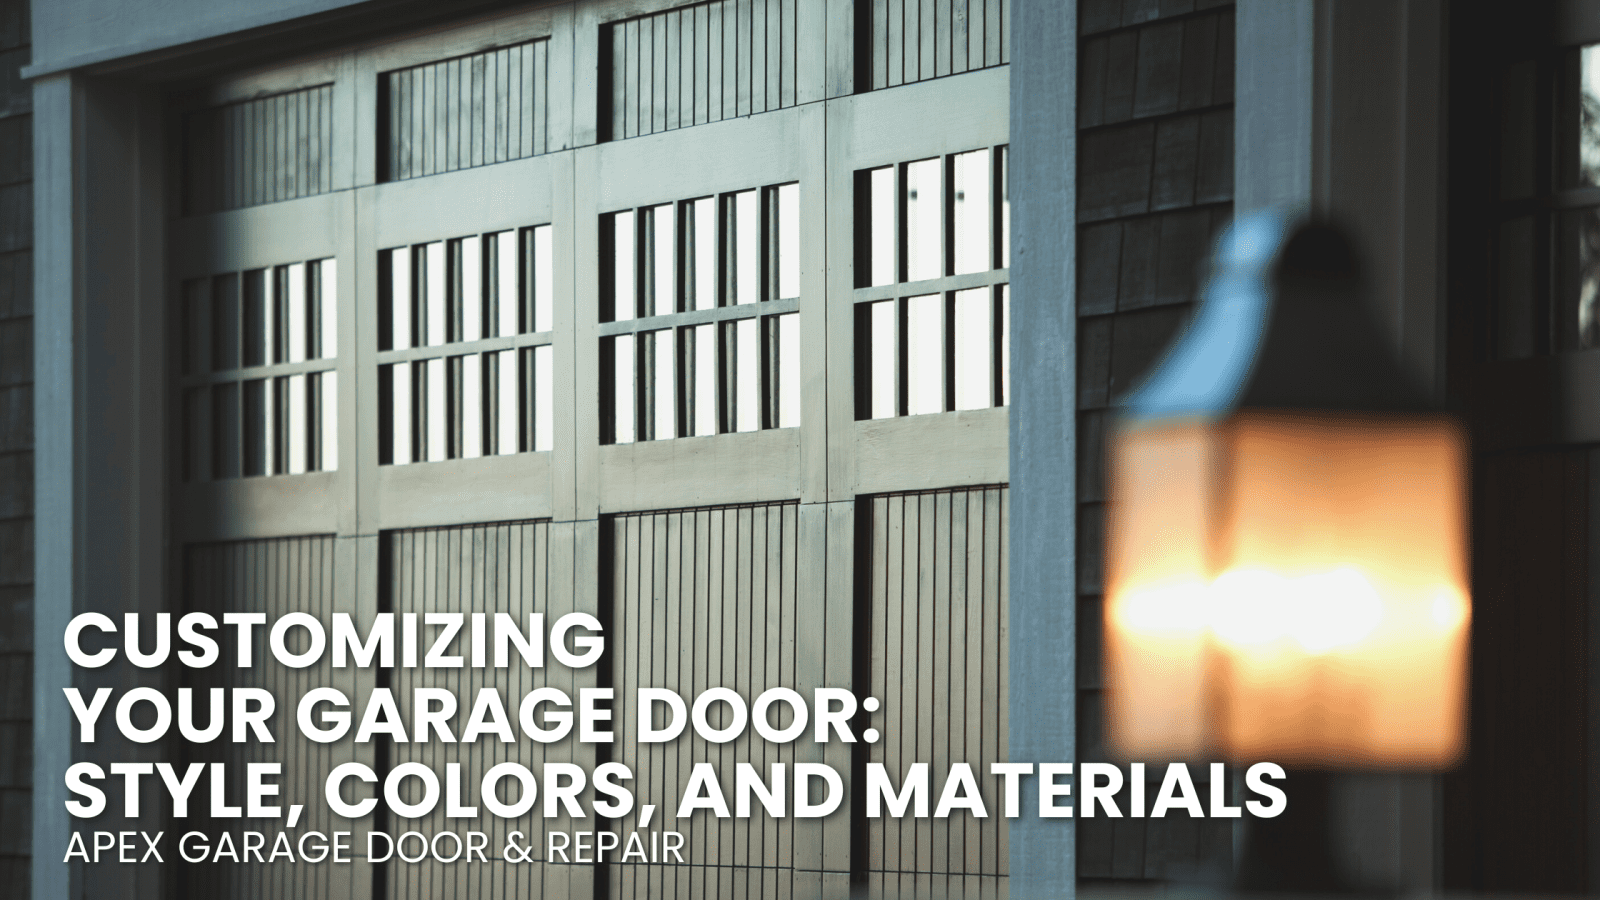 Customizing Your Garage Door: Style, Colors, and Materials